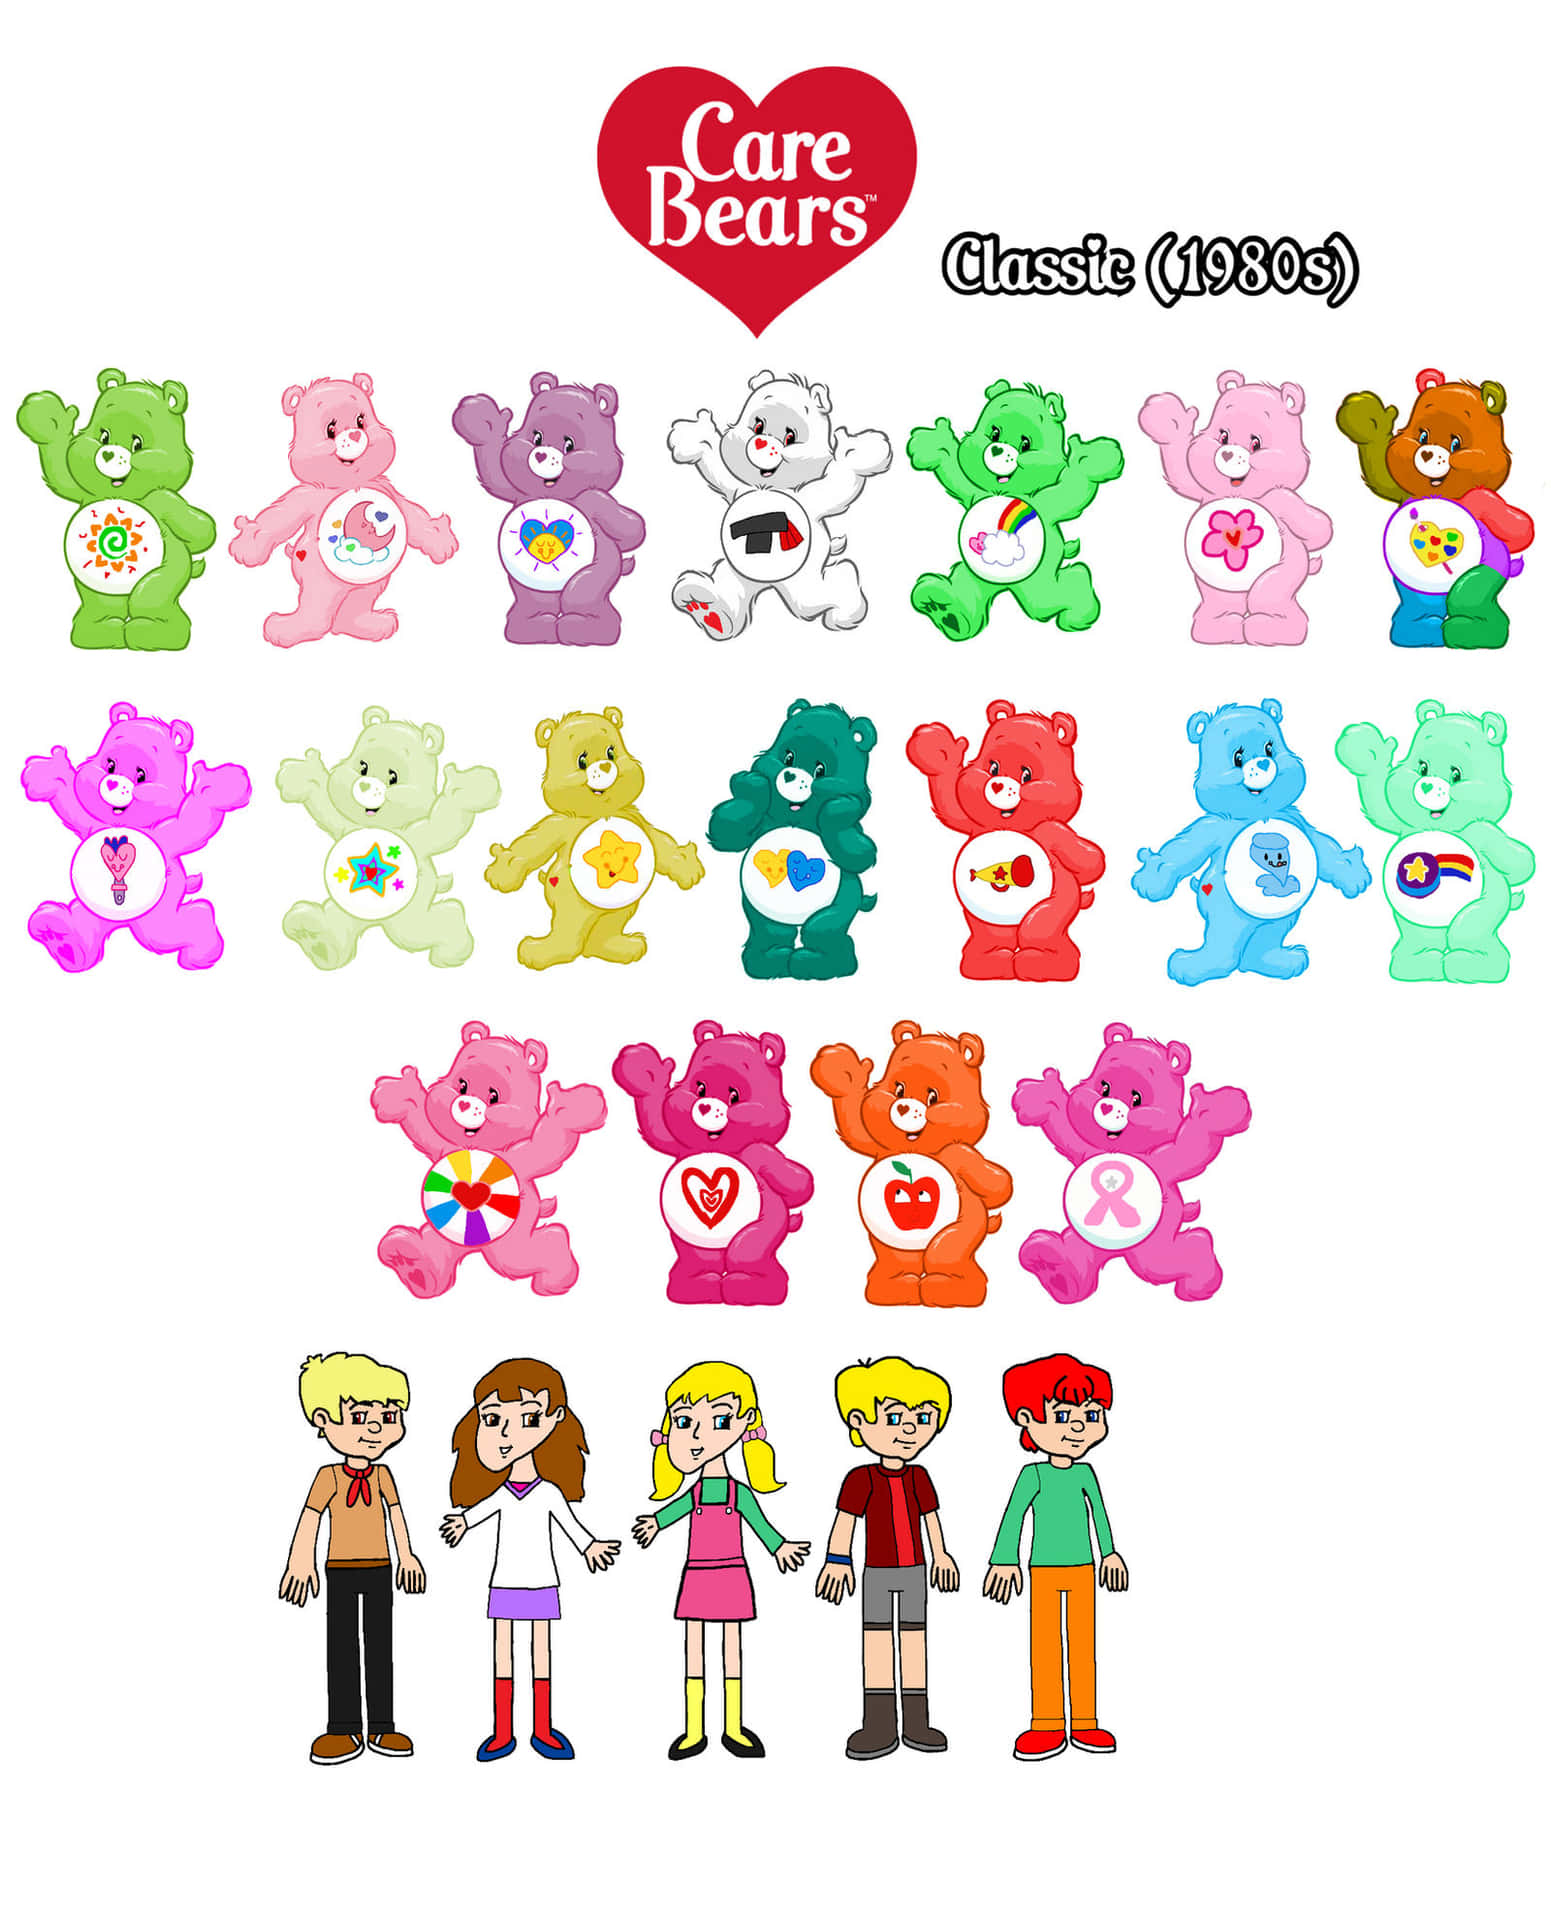 Care Bears Are Here to Bring Joy and Laughter